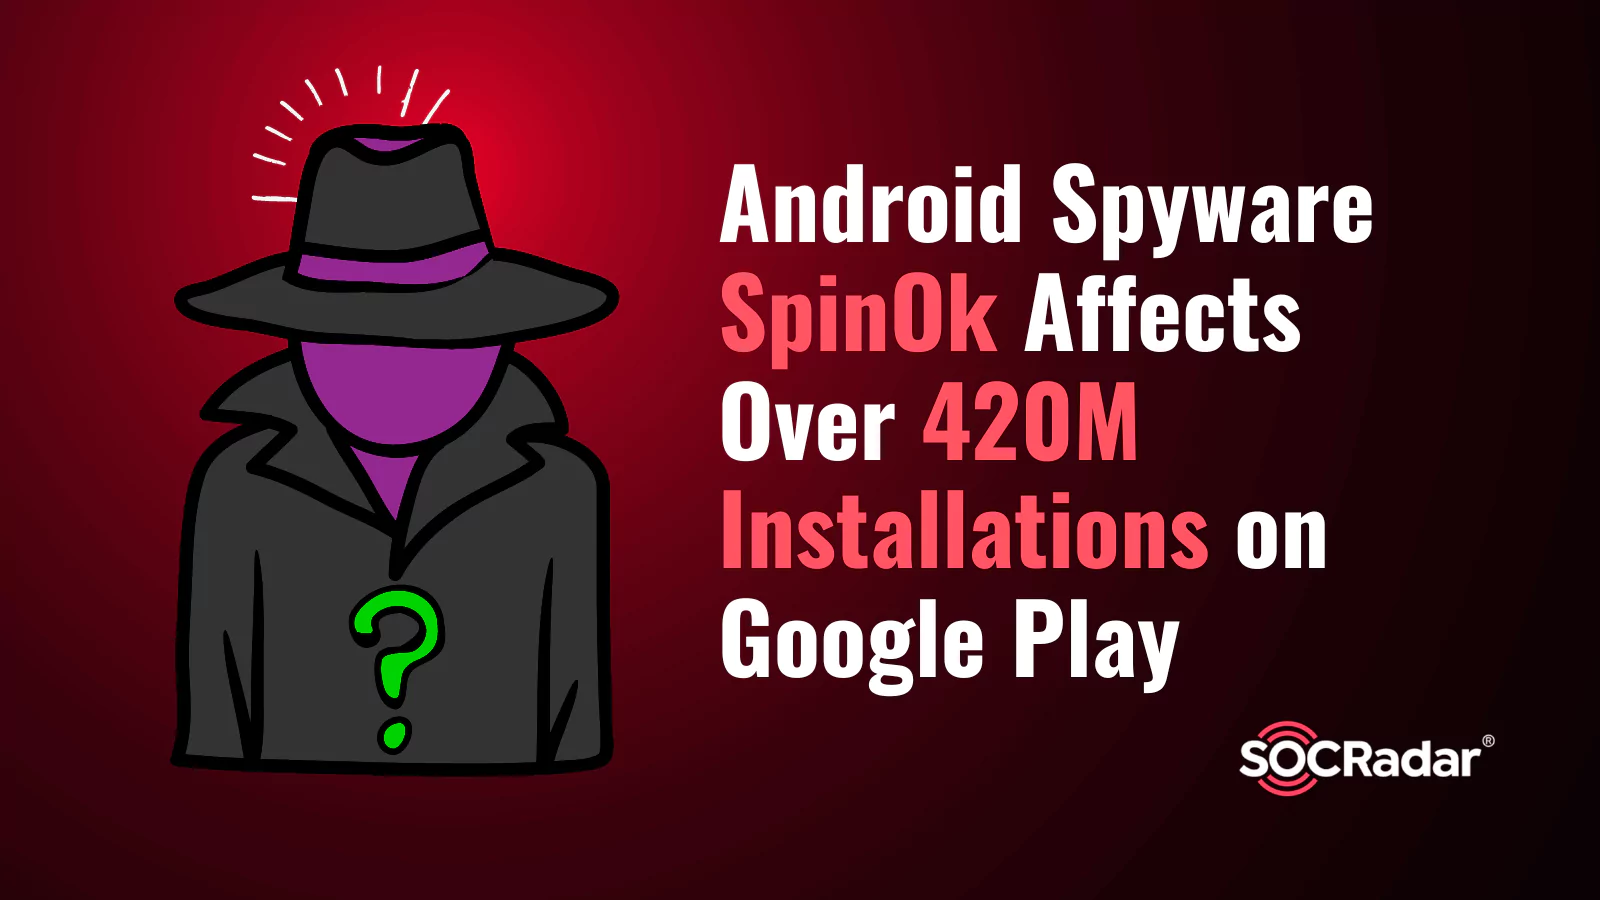 SOCRadar® Cyber Intelligence Inc. | Android Spyware SpinOk Affects Over 420M Installations on Google Play